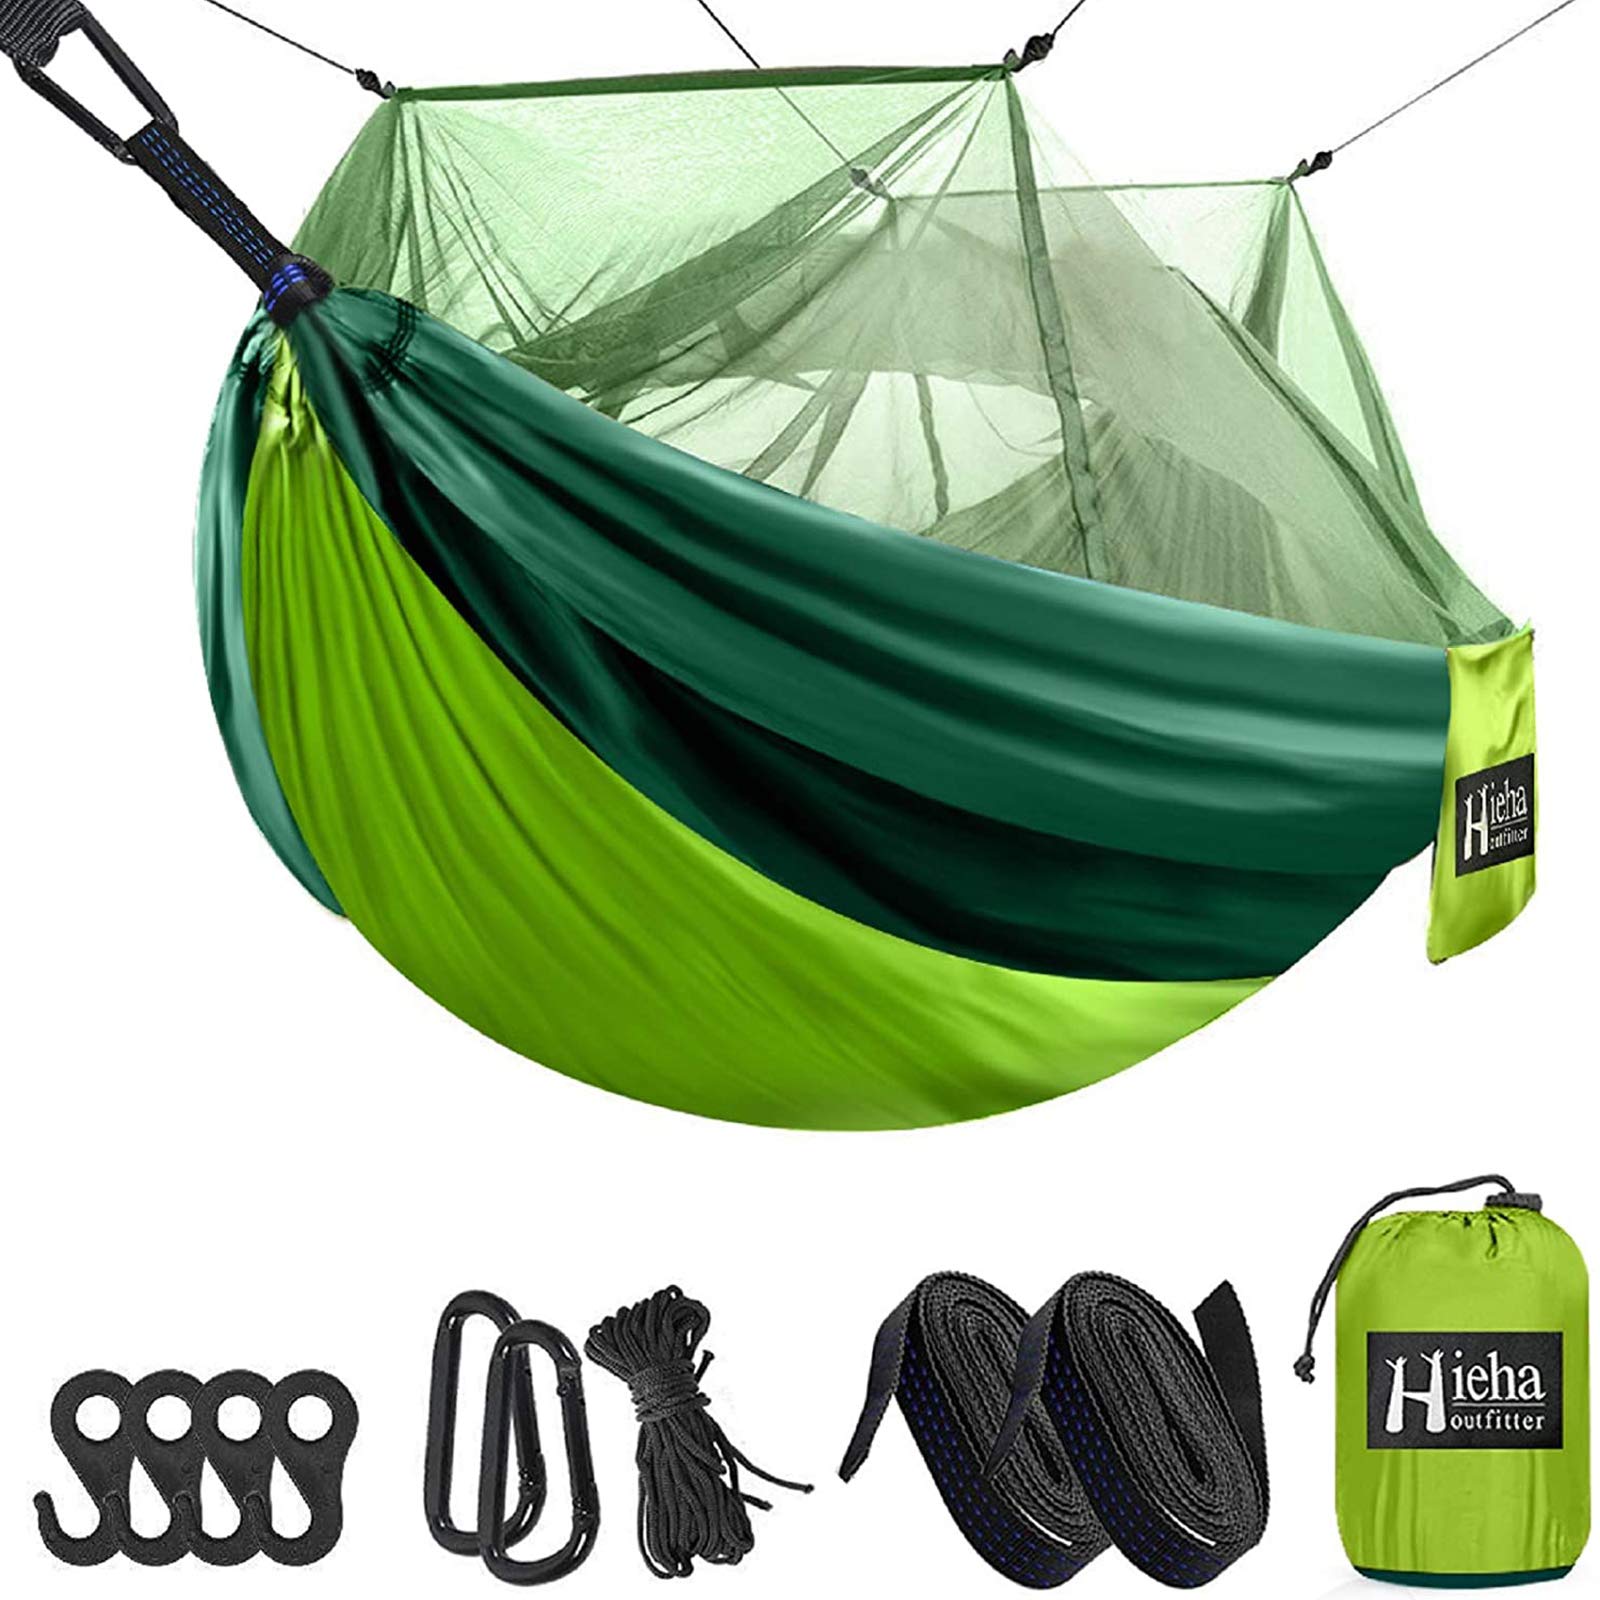 Hieha Camping Hammock with Mosquito Net, Portable Double/Single Travel Hammock w/Bug Insect Netting, Tree Straps & Carabiners for Outdoor Camping - Opticdeals